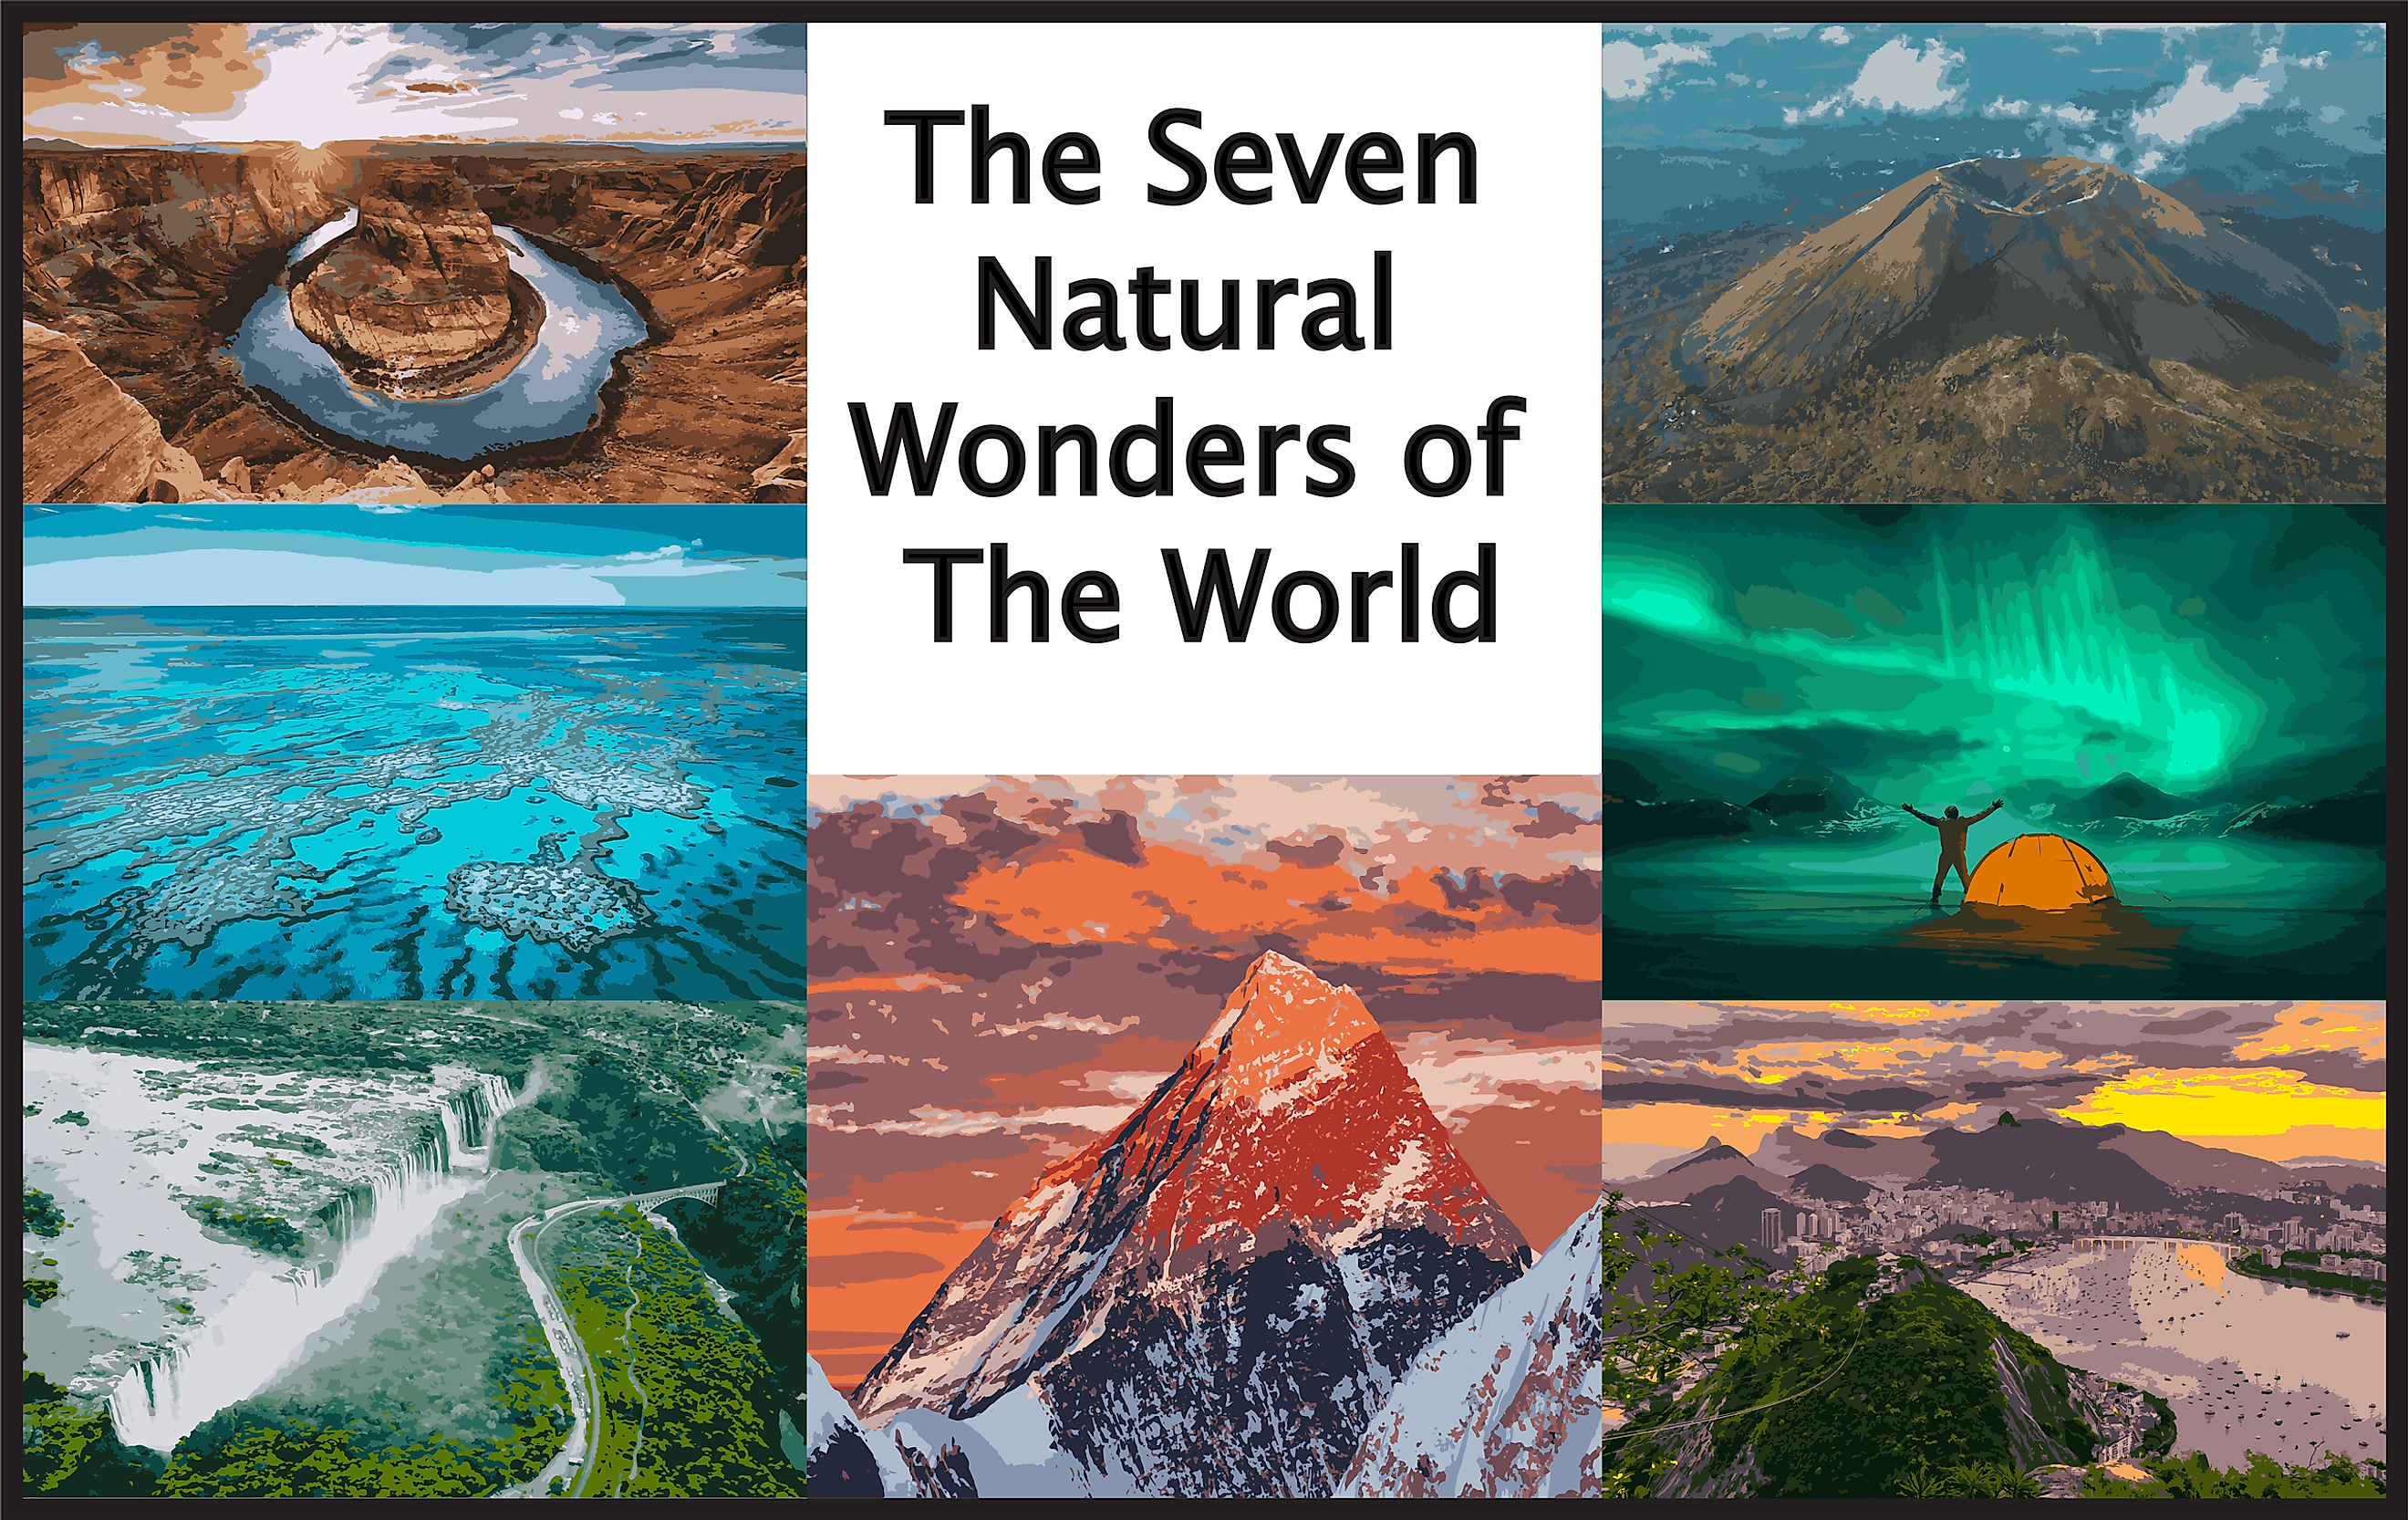 What are the 7 wonders of nature?